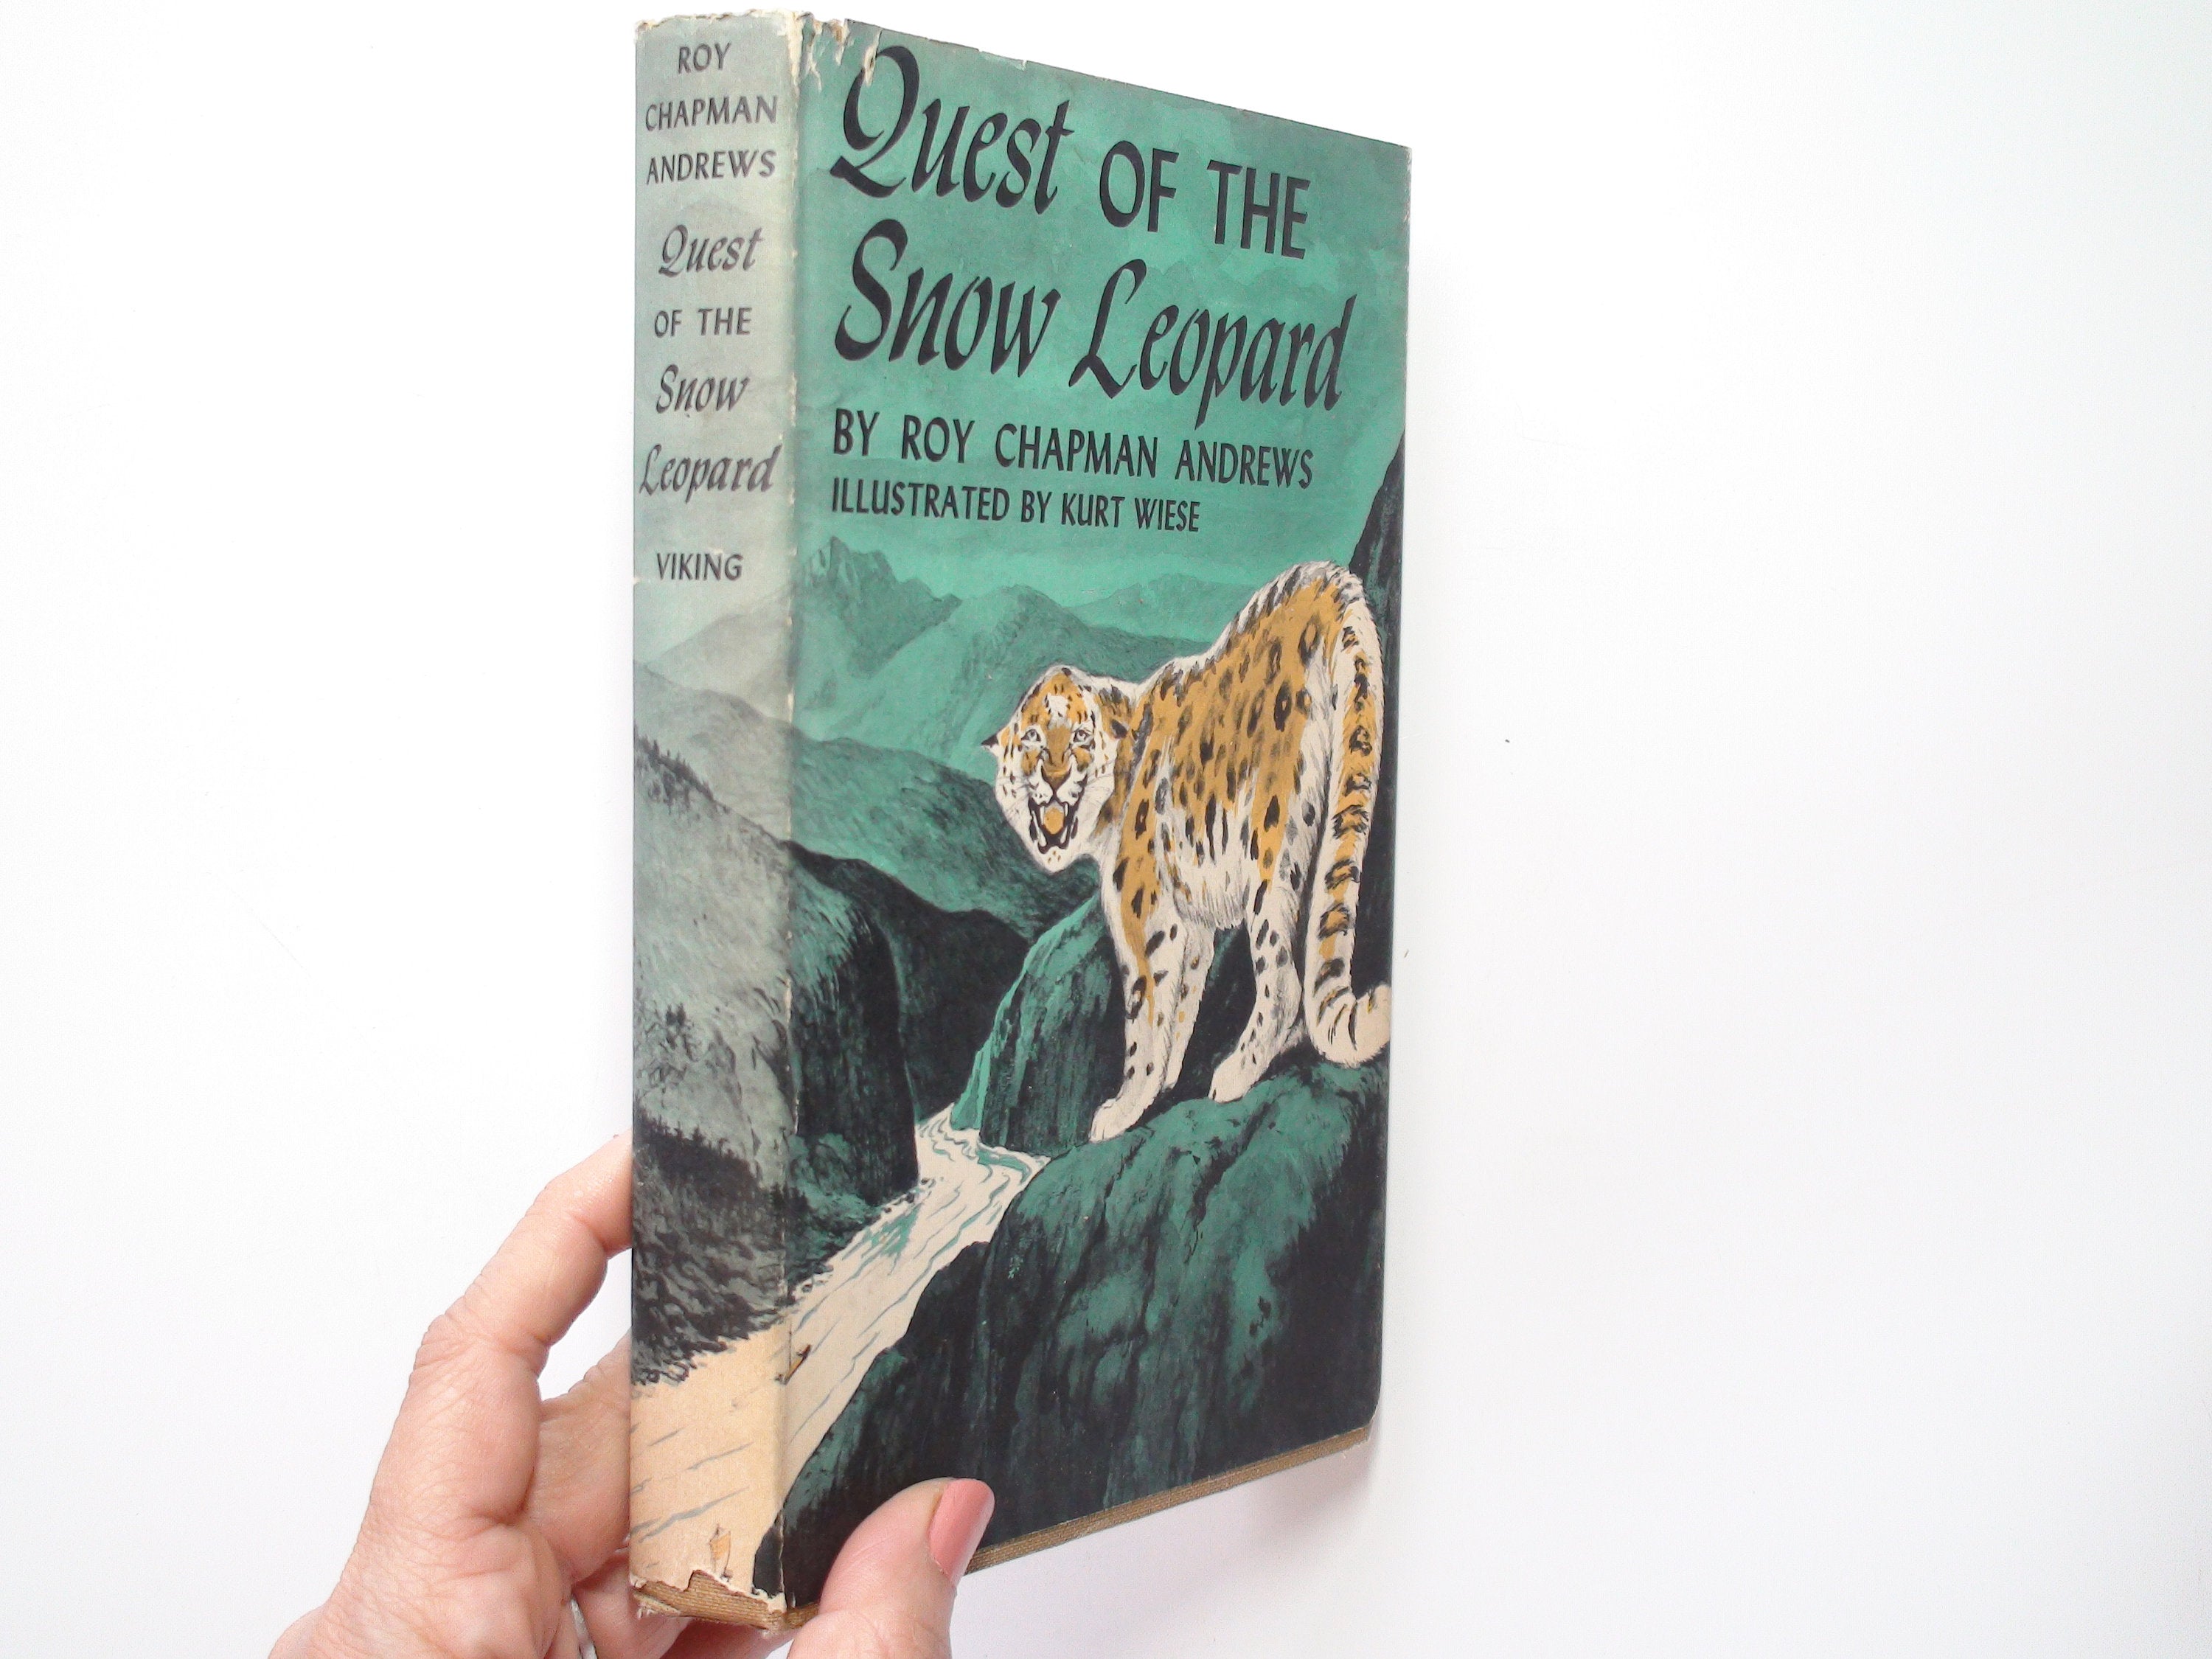 Quest of the Snow Leopard by Roy Chapman Andrews, Hardcover w/ D/J, 1st Ed, 1956